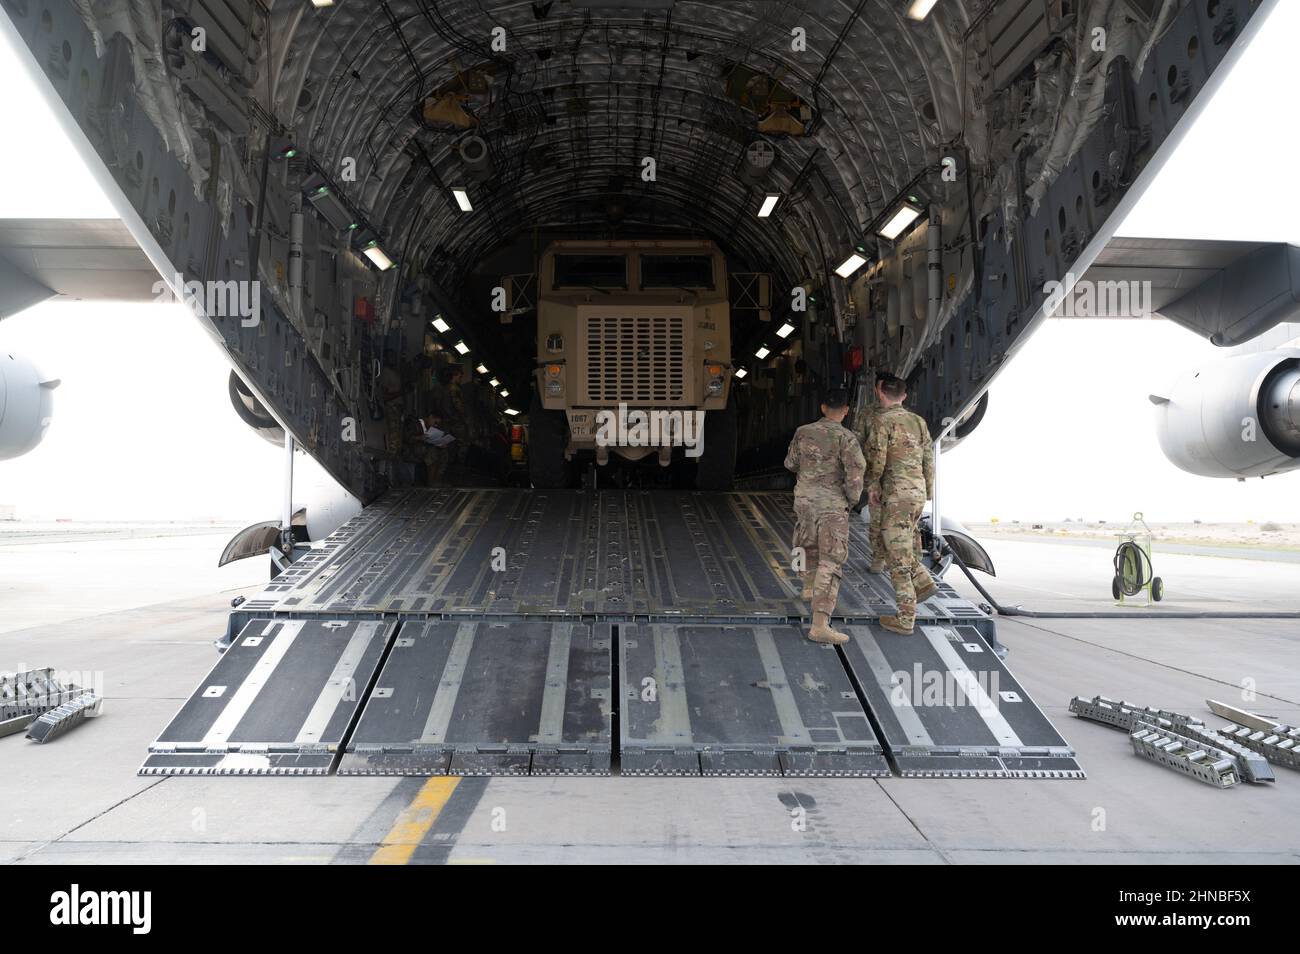 A U.S. Army HET Military Heavy Haul Tractor Truck is loaded onto a U.S. Air Force C-17 Globemaster III at Ali Al Salem, Kuwait, Feb. 10, 2022.  The C-17 Globemaster III is the most flexible cargo aircraft to enter the airlift force allowing cargo to be loaded onto the C-17 through a large rear ramp and door system that accommodates virtually all of the Army’s air-transportable equipment such as a 69-ton M1 Abrams main battle tank, armored vehicles, trucks and trailers.  (U.S. Air Force photo by Senior Airman Daira Jackson) Stock Photo